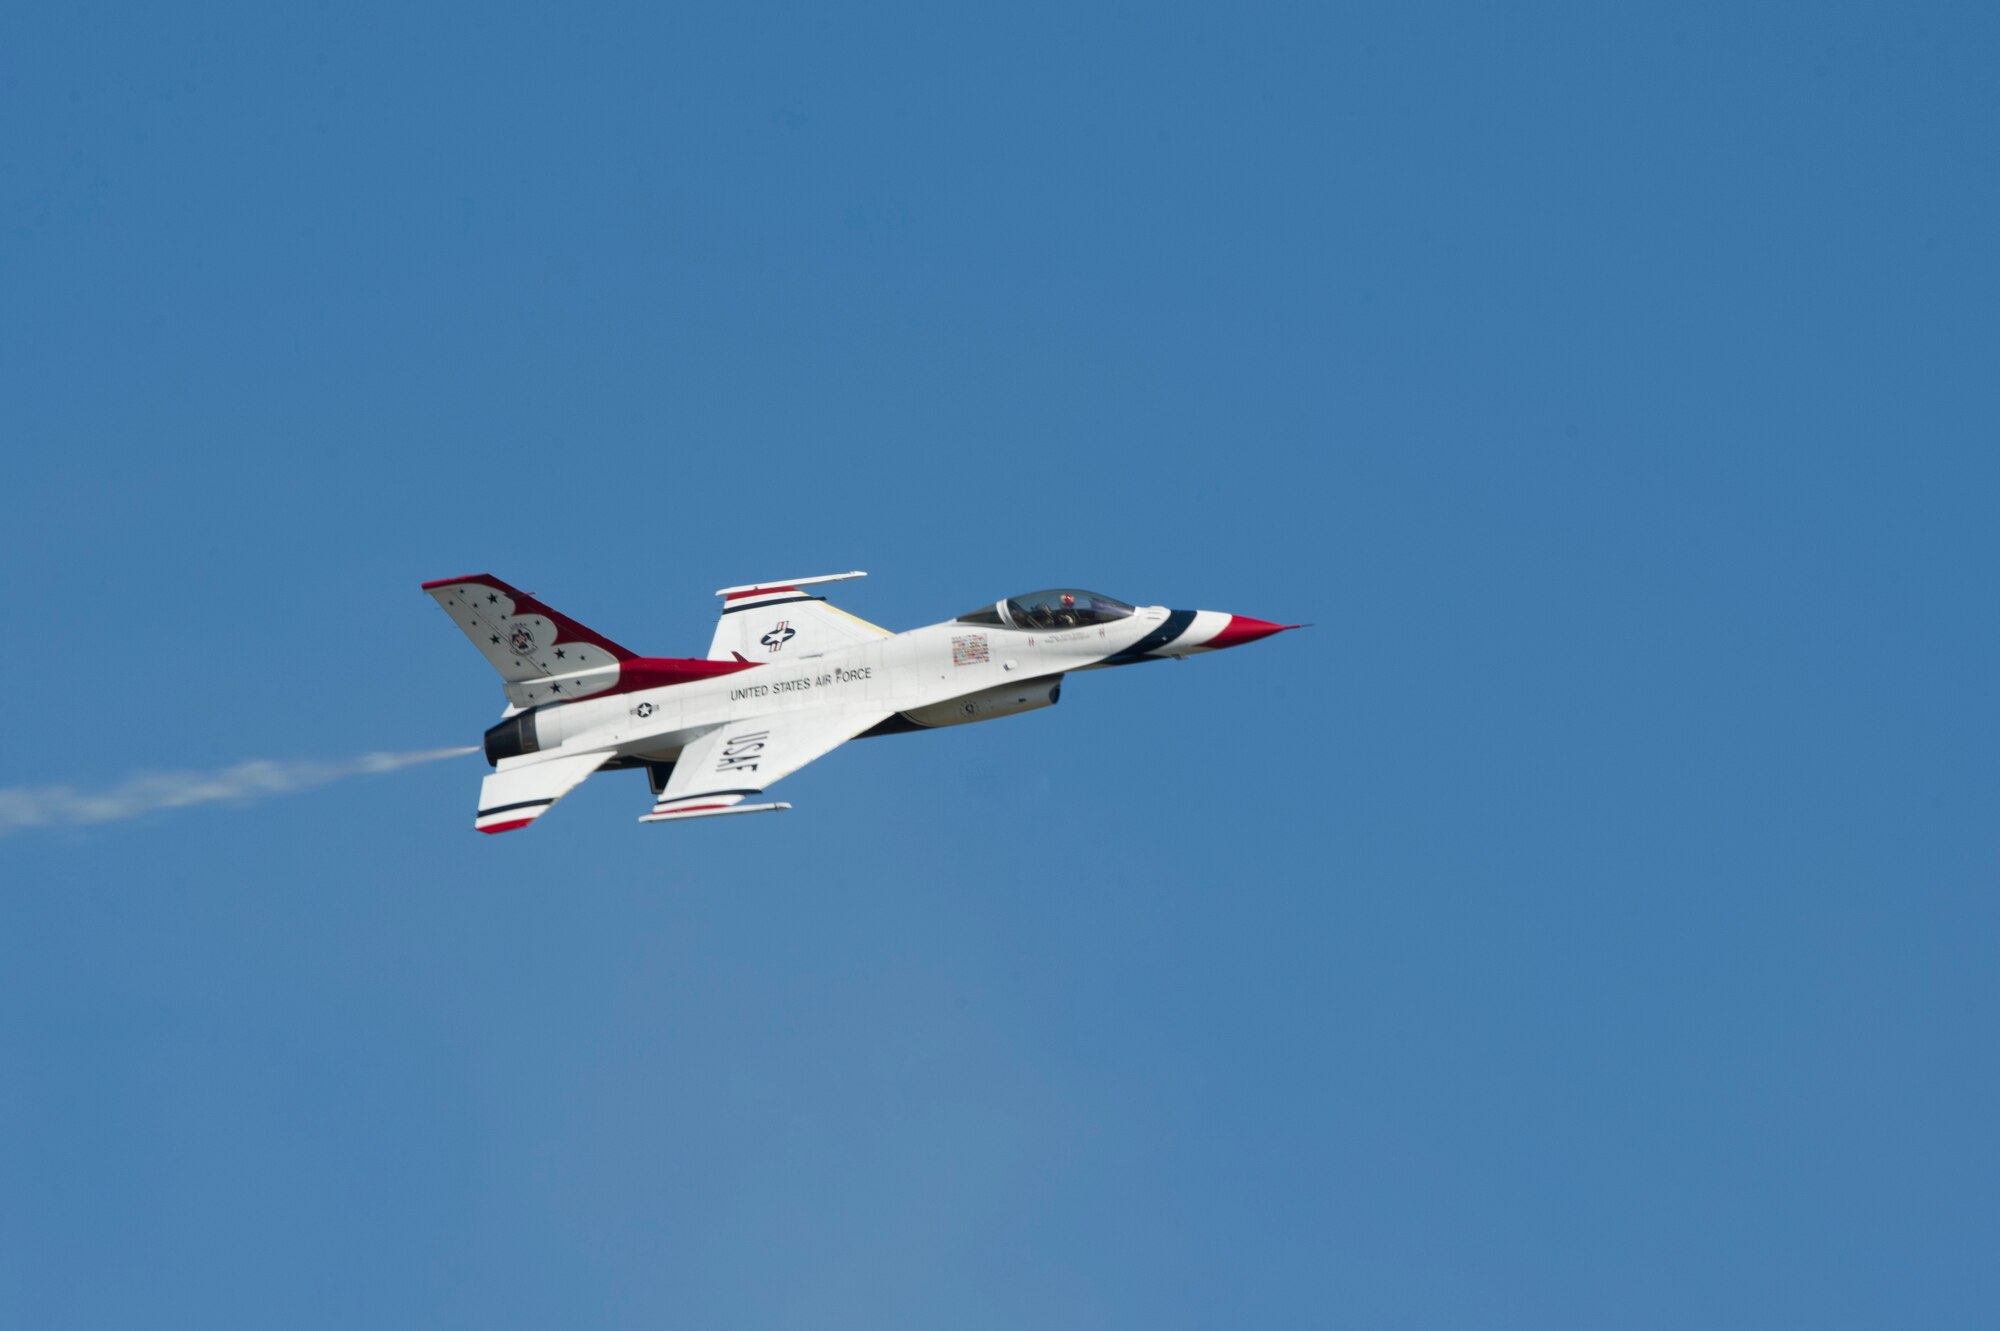 A member of the U.S. Air Force Thunderbirds Flight Demonstration Team aviates during the Thunder Over South Georgia Air Show, Oct. 29, 2017, at Moody Air Force Base, Ga. The Thunderbirds performed twists, turns and rolls at high speeds demonstrating the prowess and capabilities of the F-16 Fighting Falcon. (U.S. Air Force photo by Senior Airman Greg Nash)